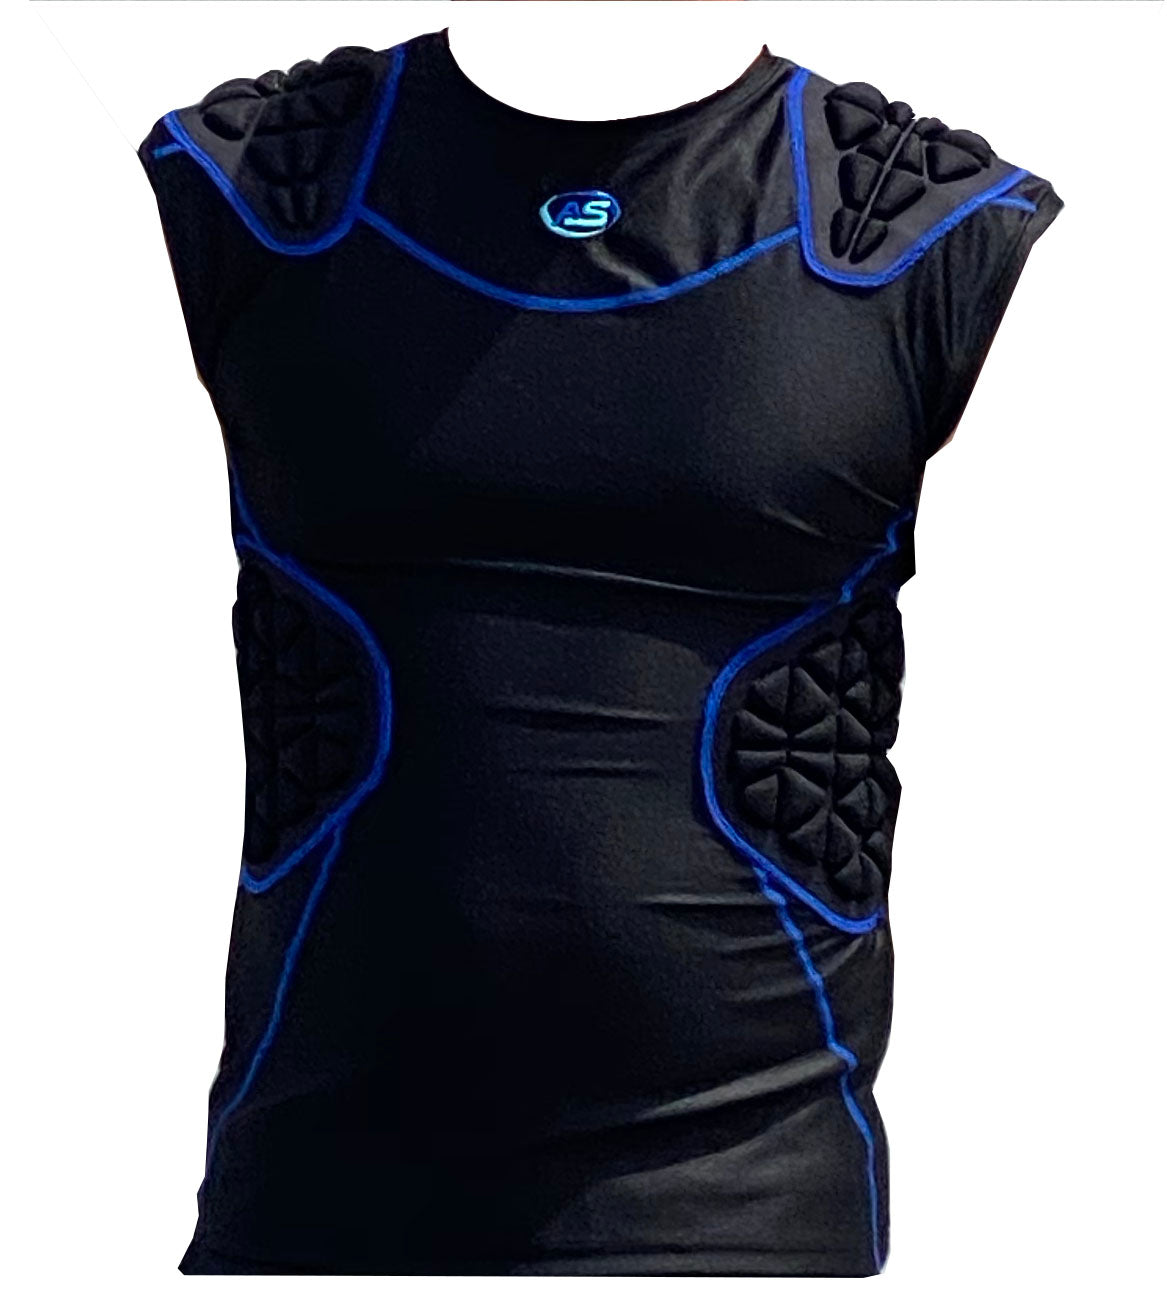 AS Brand Apex Padded Compression Shirt